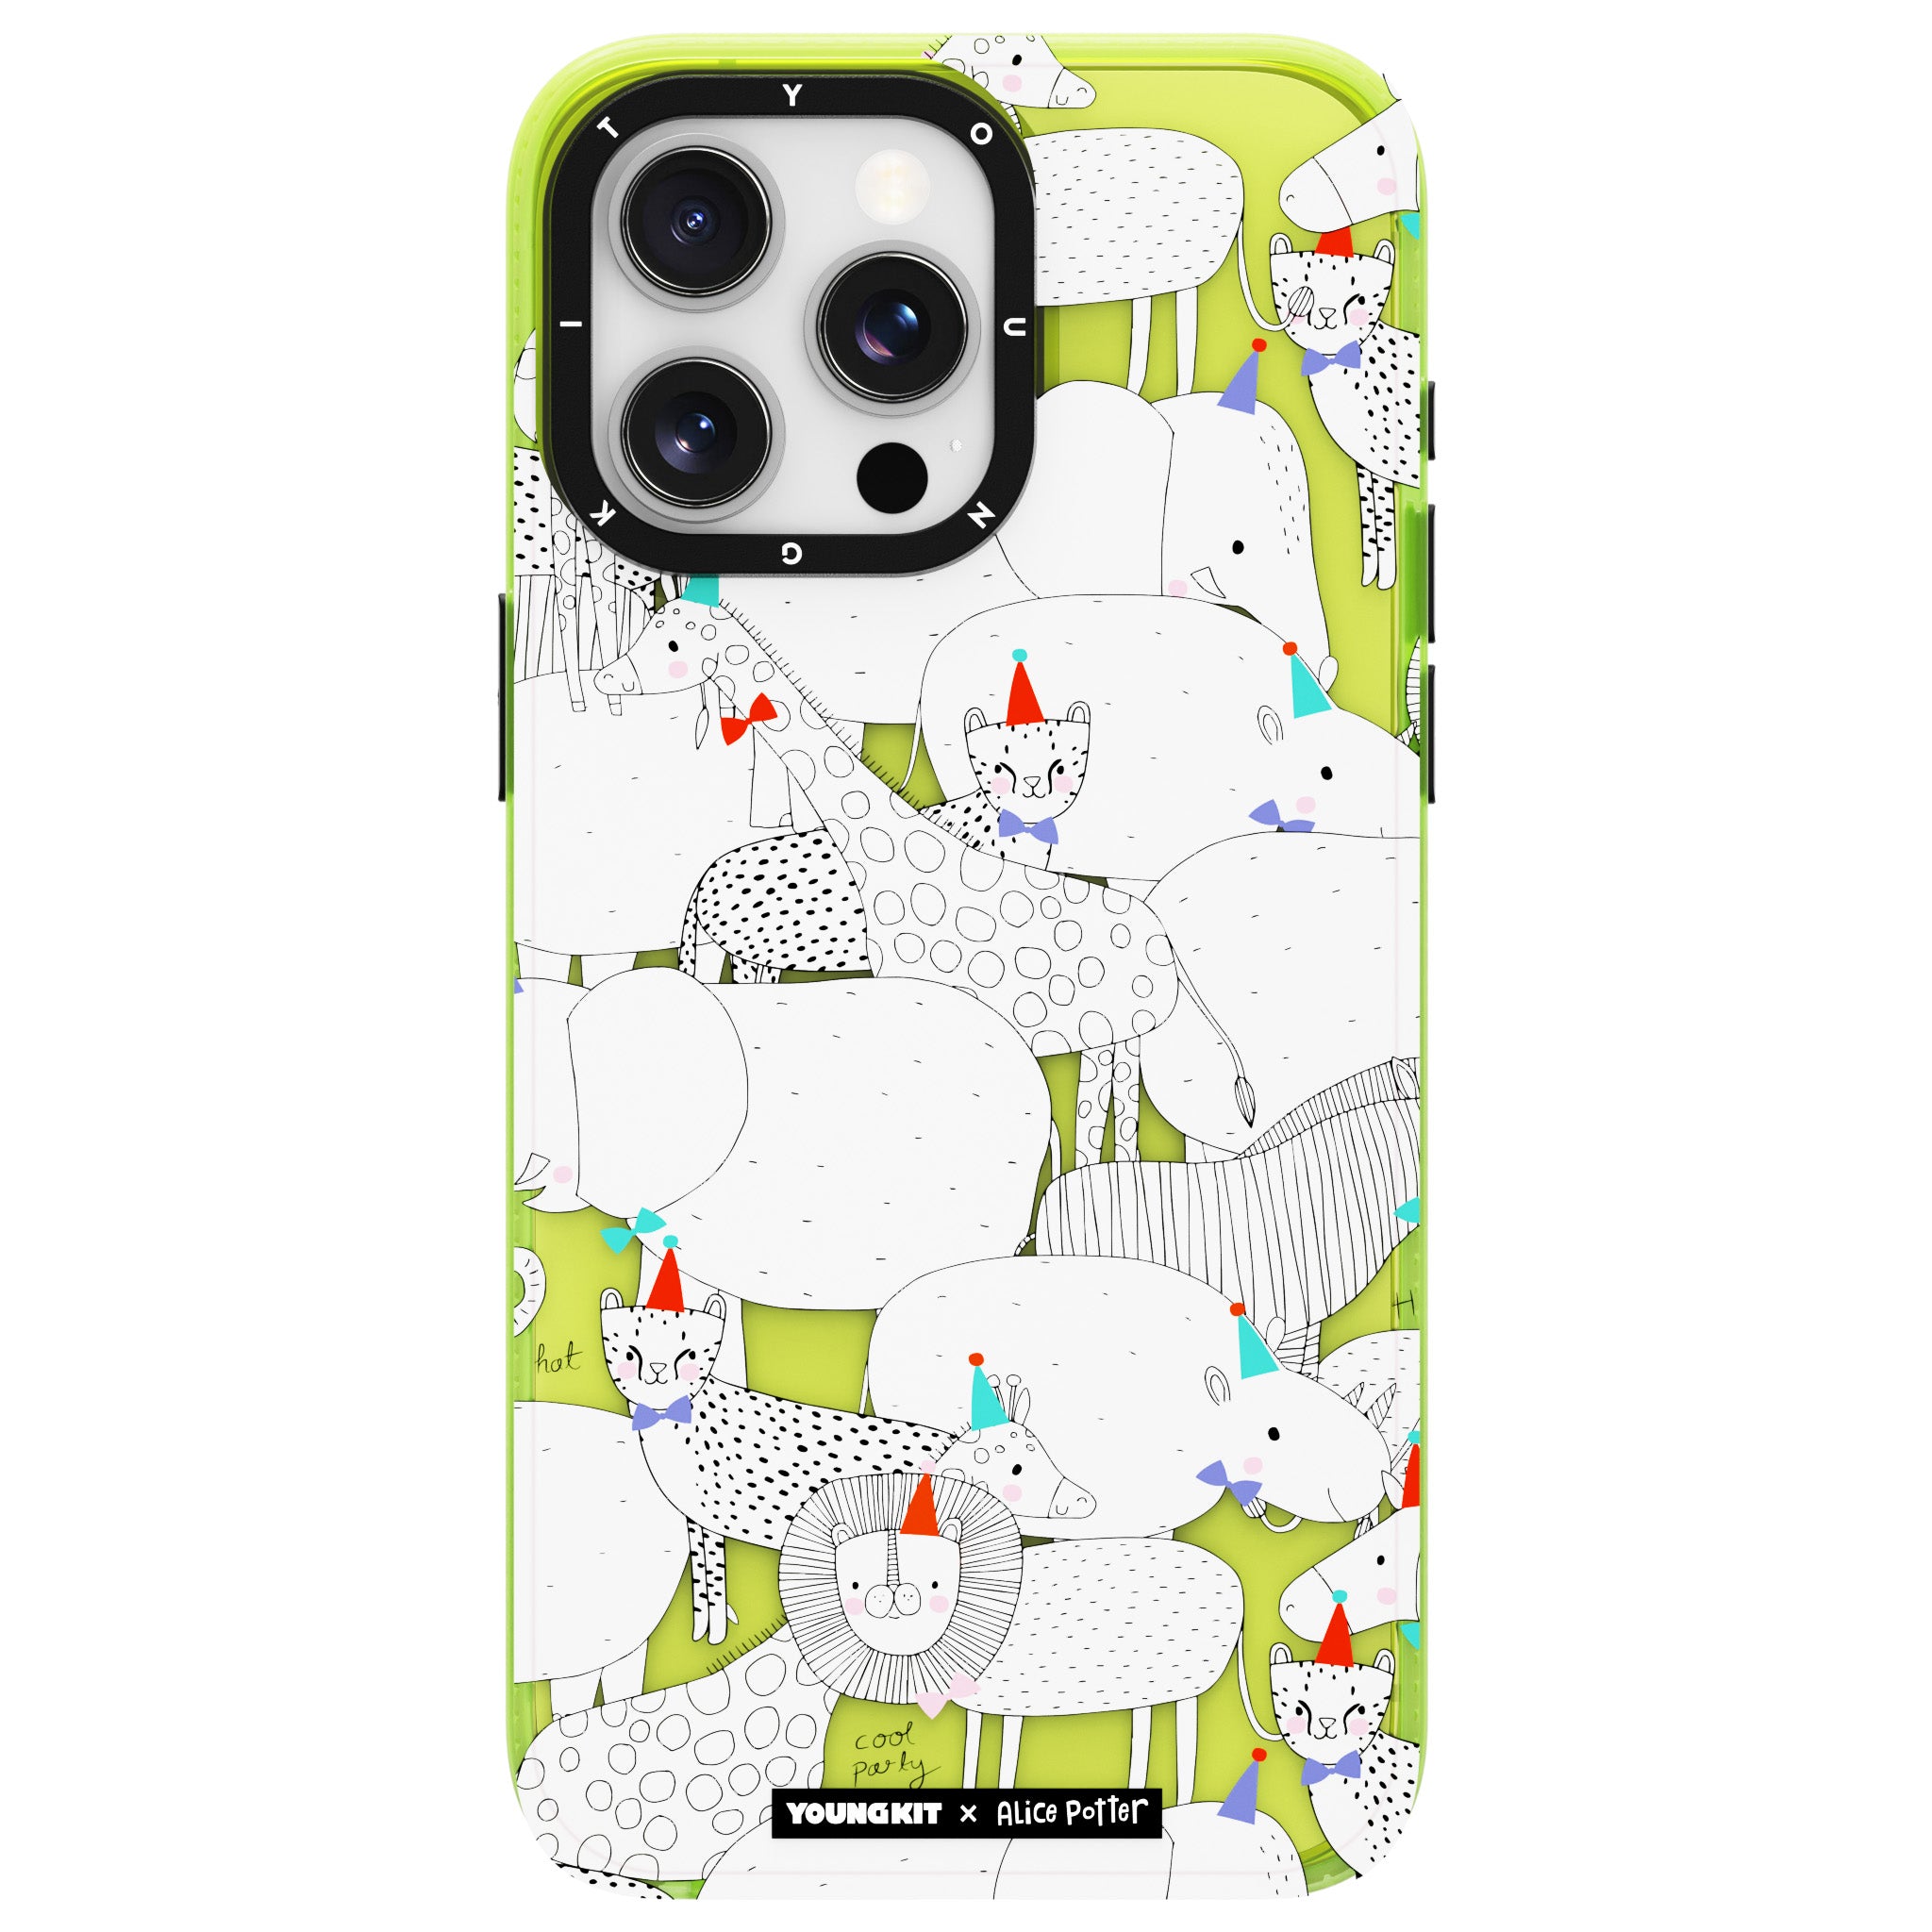 YOUNGKIT X Alice Potter iPhone15 Case